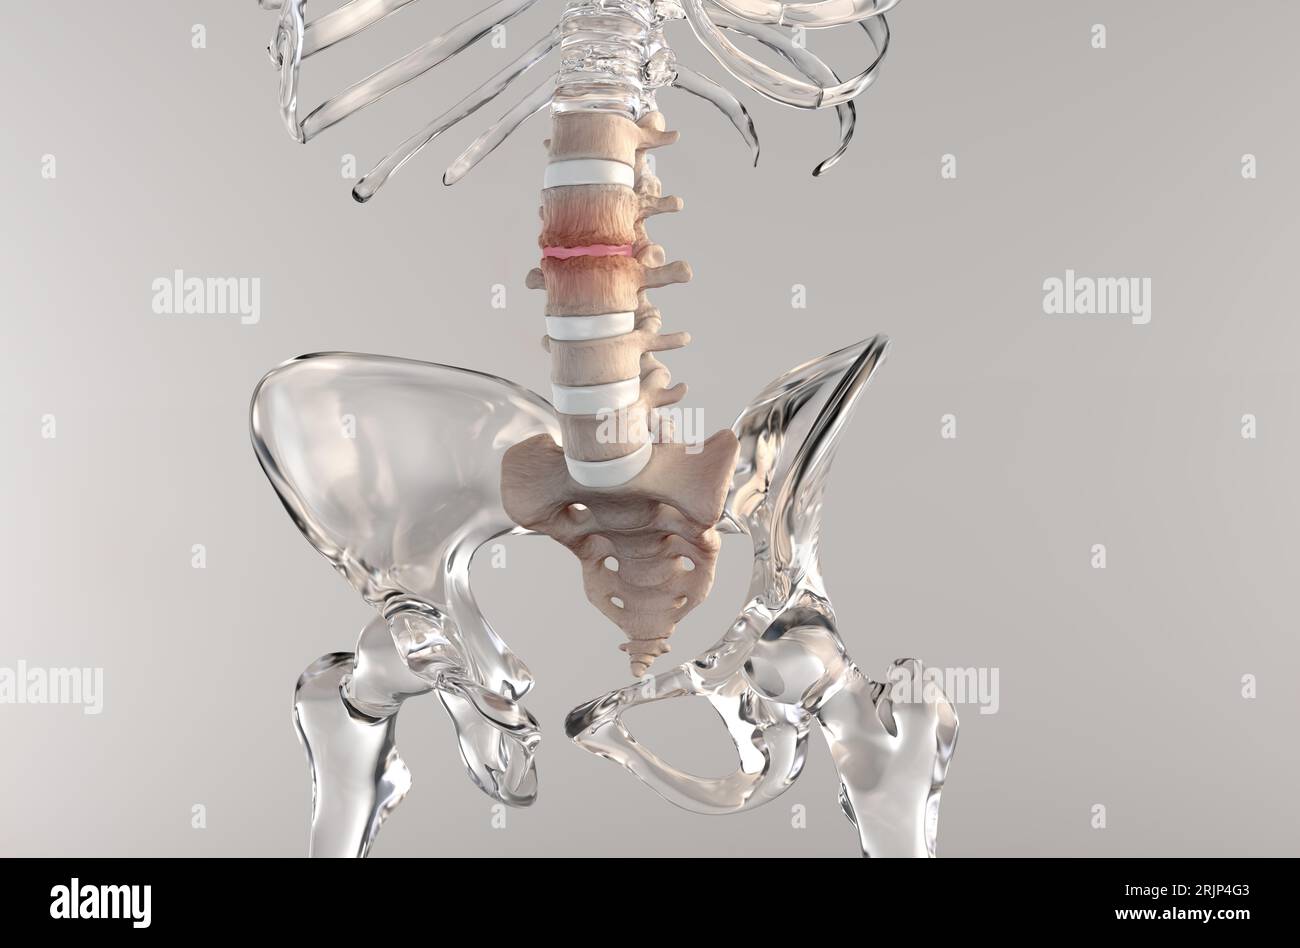 3D medical illustration of a human skeleton suffering stenosis in the lumbar spine region Stock Photo